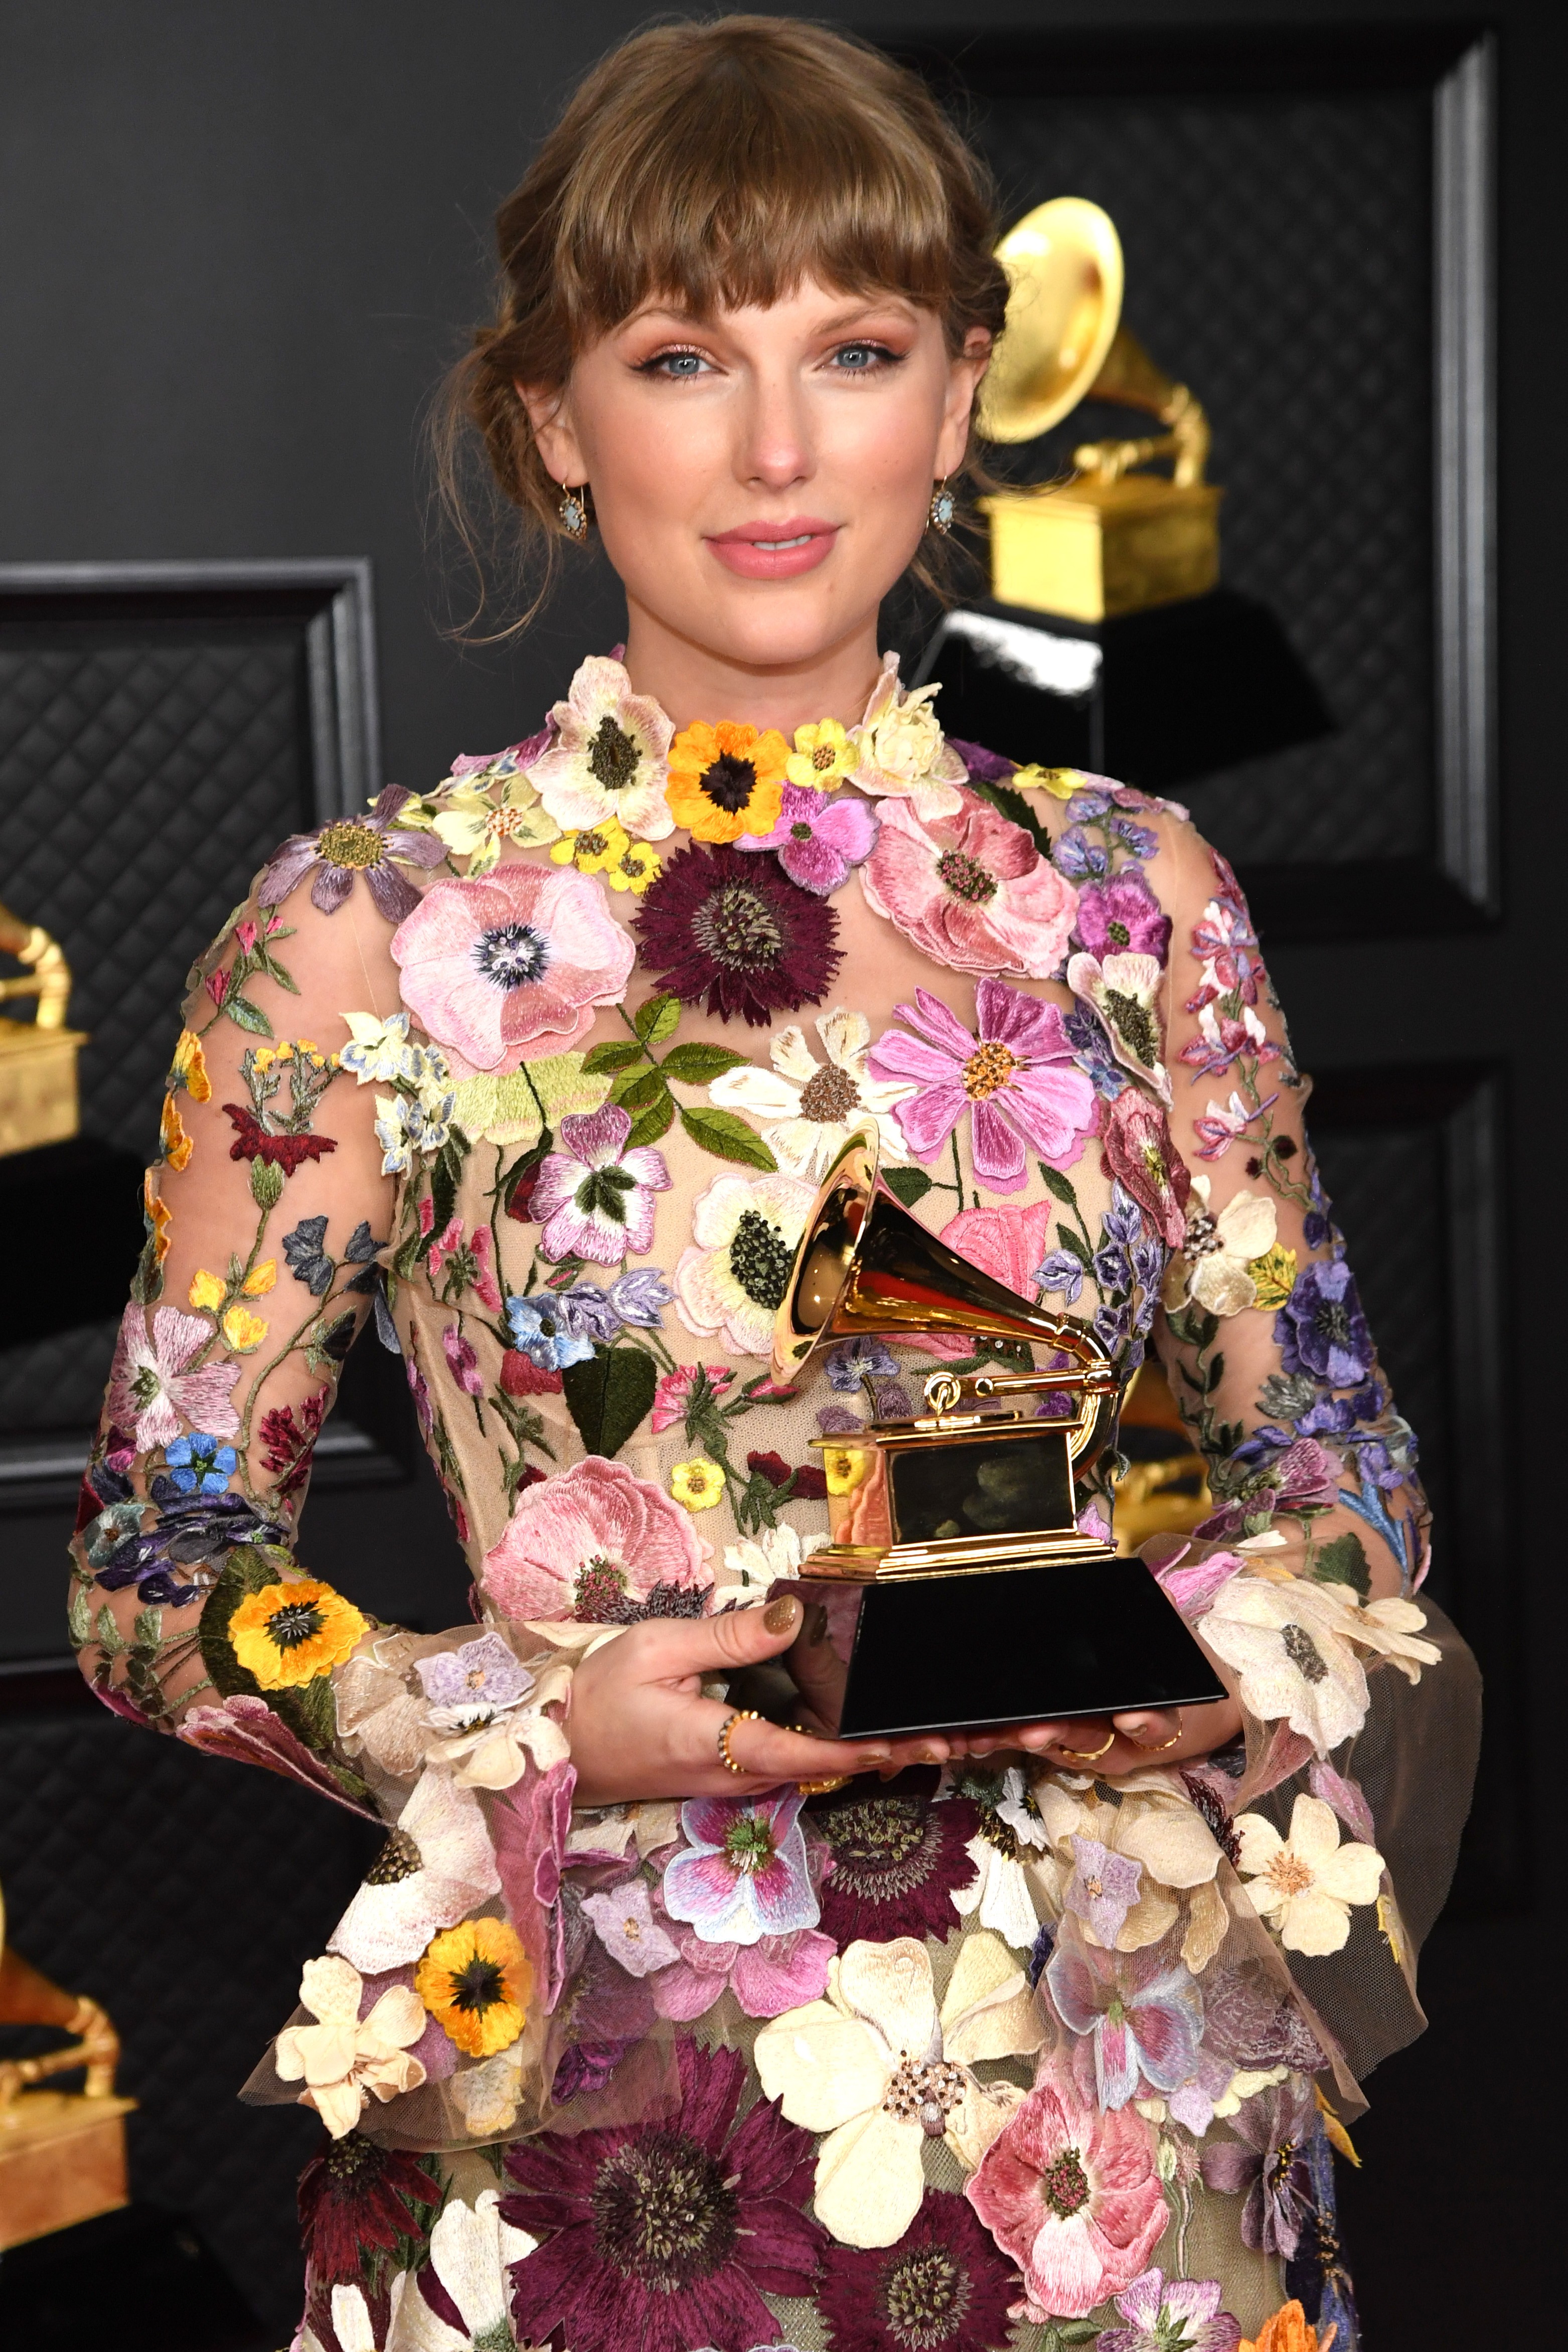 LOS ANGELES, CALIFORNIA - MARCH 14: Taylor Swift, winner of the Album of the Year award for ‘Folklore,’ poses in the media room during the 63rd Annual GRAMMY Awards at Los Angeles Convention Center on March 14, 2021 in Los Angeles, California. (Photo by K (Foto: Getty Images for The Recording A)